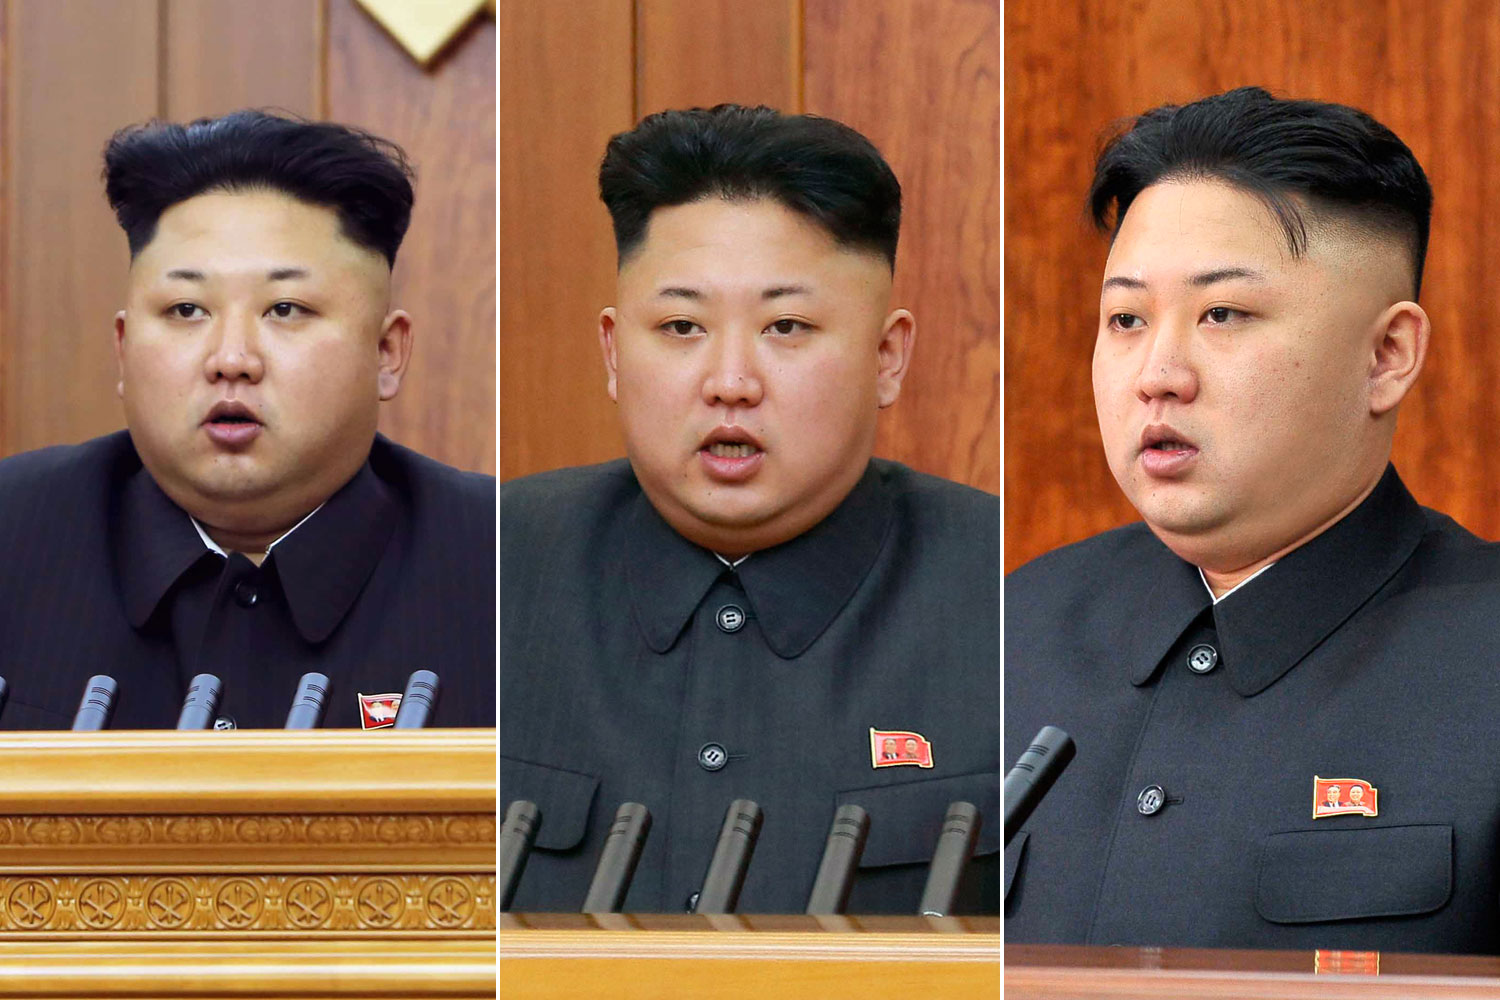 From left: Kim Jong Un delivers a New Year's address on Jan. 1, 2015, Jan. 1, 2014, and Jan. 1, 2013. (KCNA/Reuters (3))